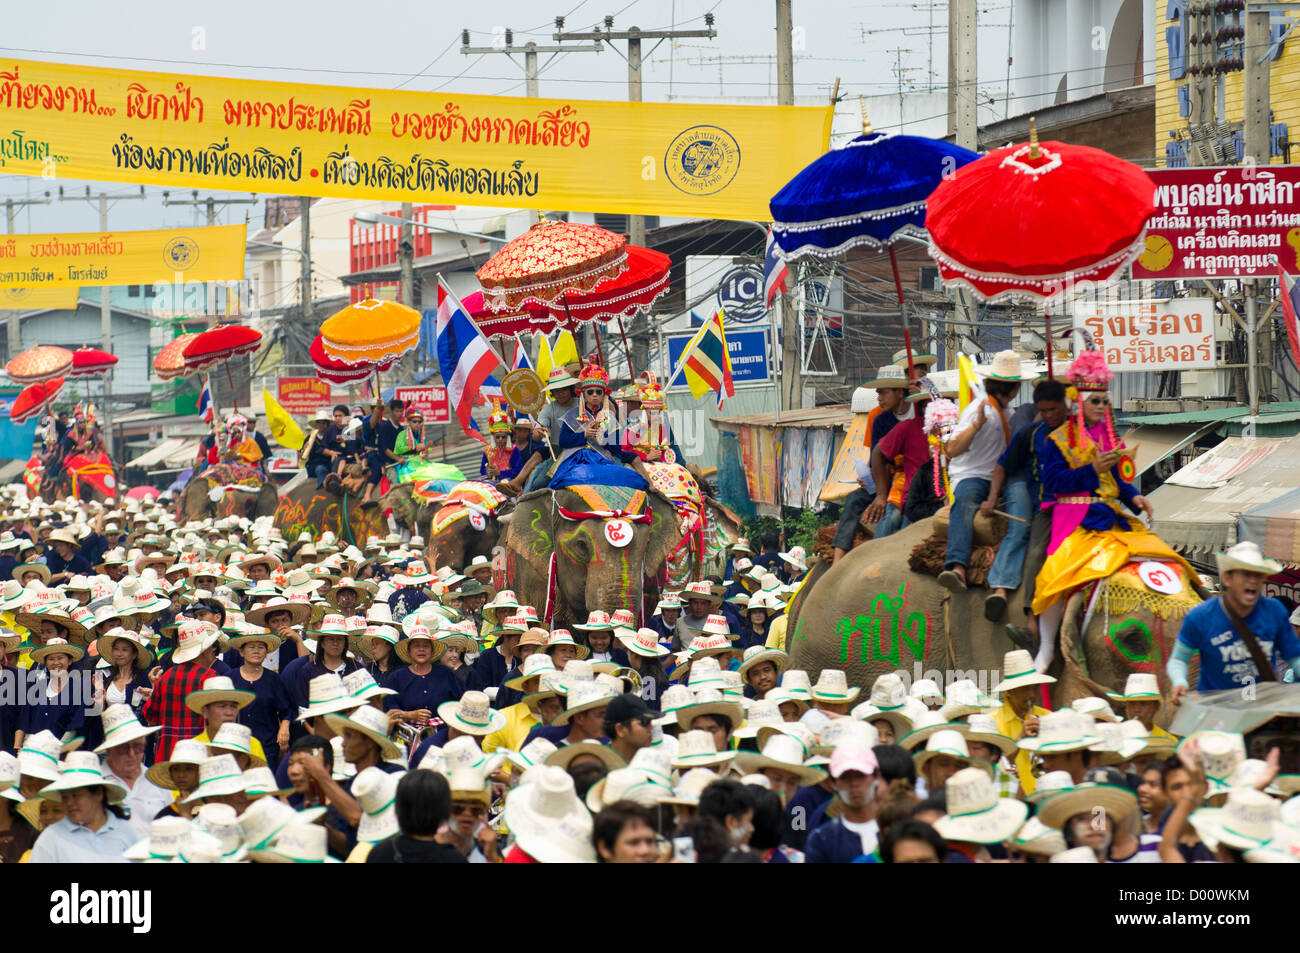 Initiates dressed in garish costumes and sunglasses in procession on elephants from Wat Hat Siao, Elephant Back Ordination Ceremony (Buat Chang), Si Sachanalai, Sukhothai, Thailand Stock Photo